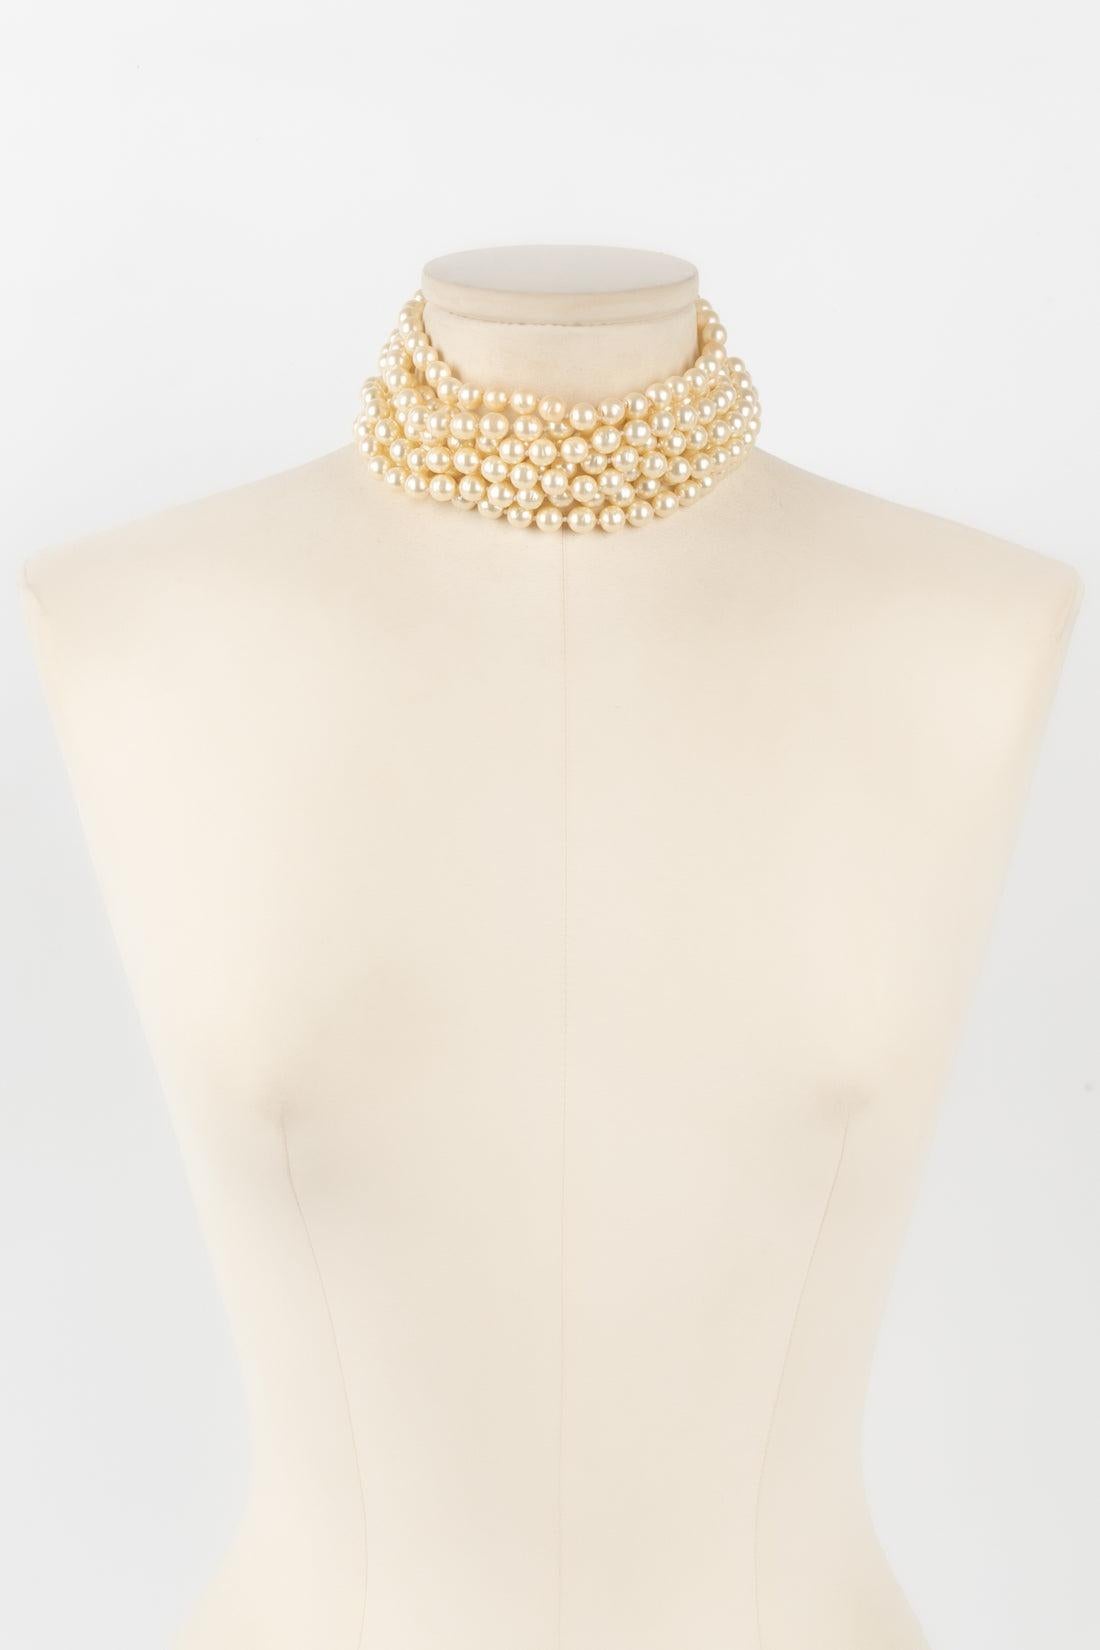 Chanel - (Made in France) Golden metal choker with costume pearls. Jewelry from the 1980s.

Additional information:
Condition: Very good condition
Dimensions: Length: from 33 cm to 37 cm
Period: 20th Century

Seller Reference: CB196